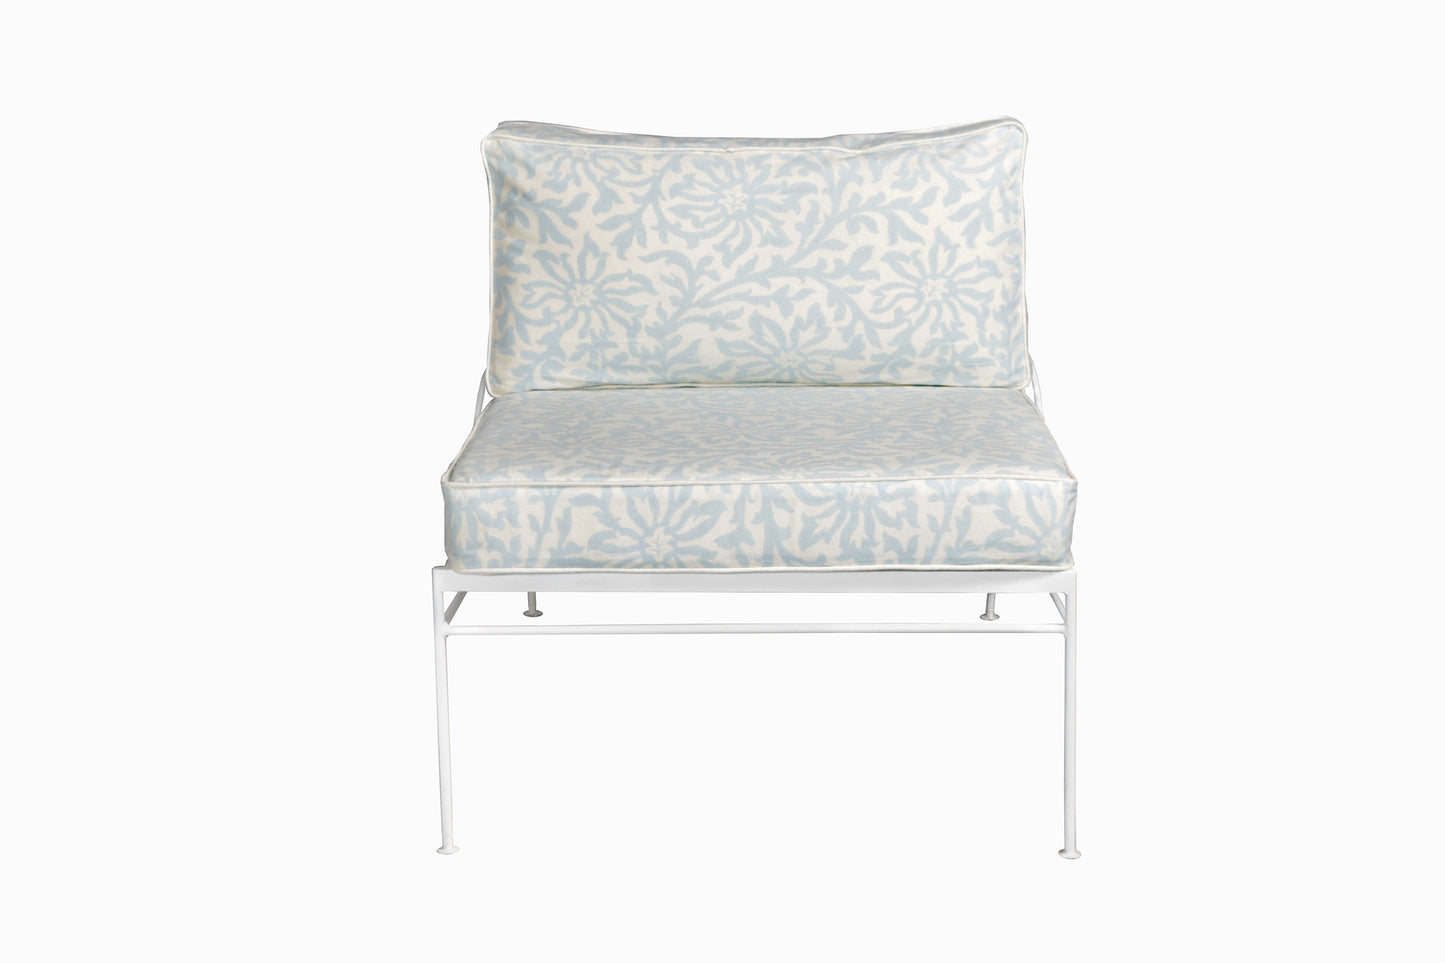 PALM SPRINGS WHITE METAL CHAIR V&A Collaboration in Clematis - Powder Blue